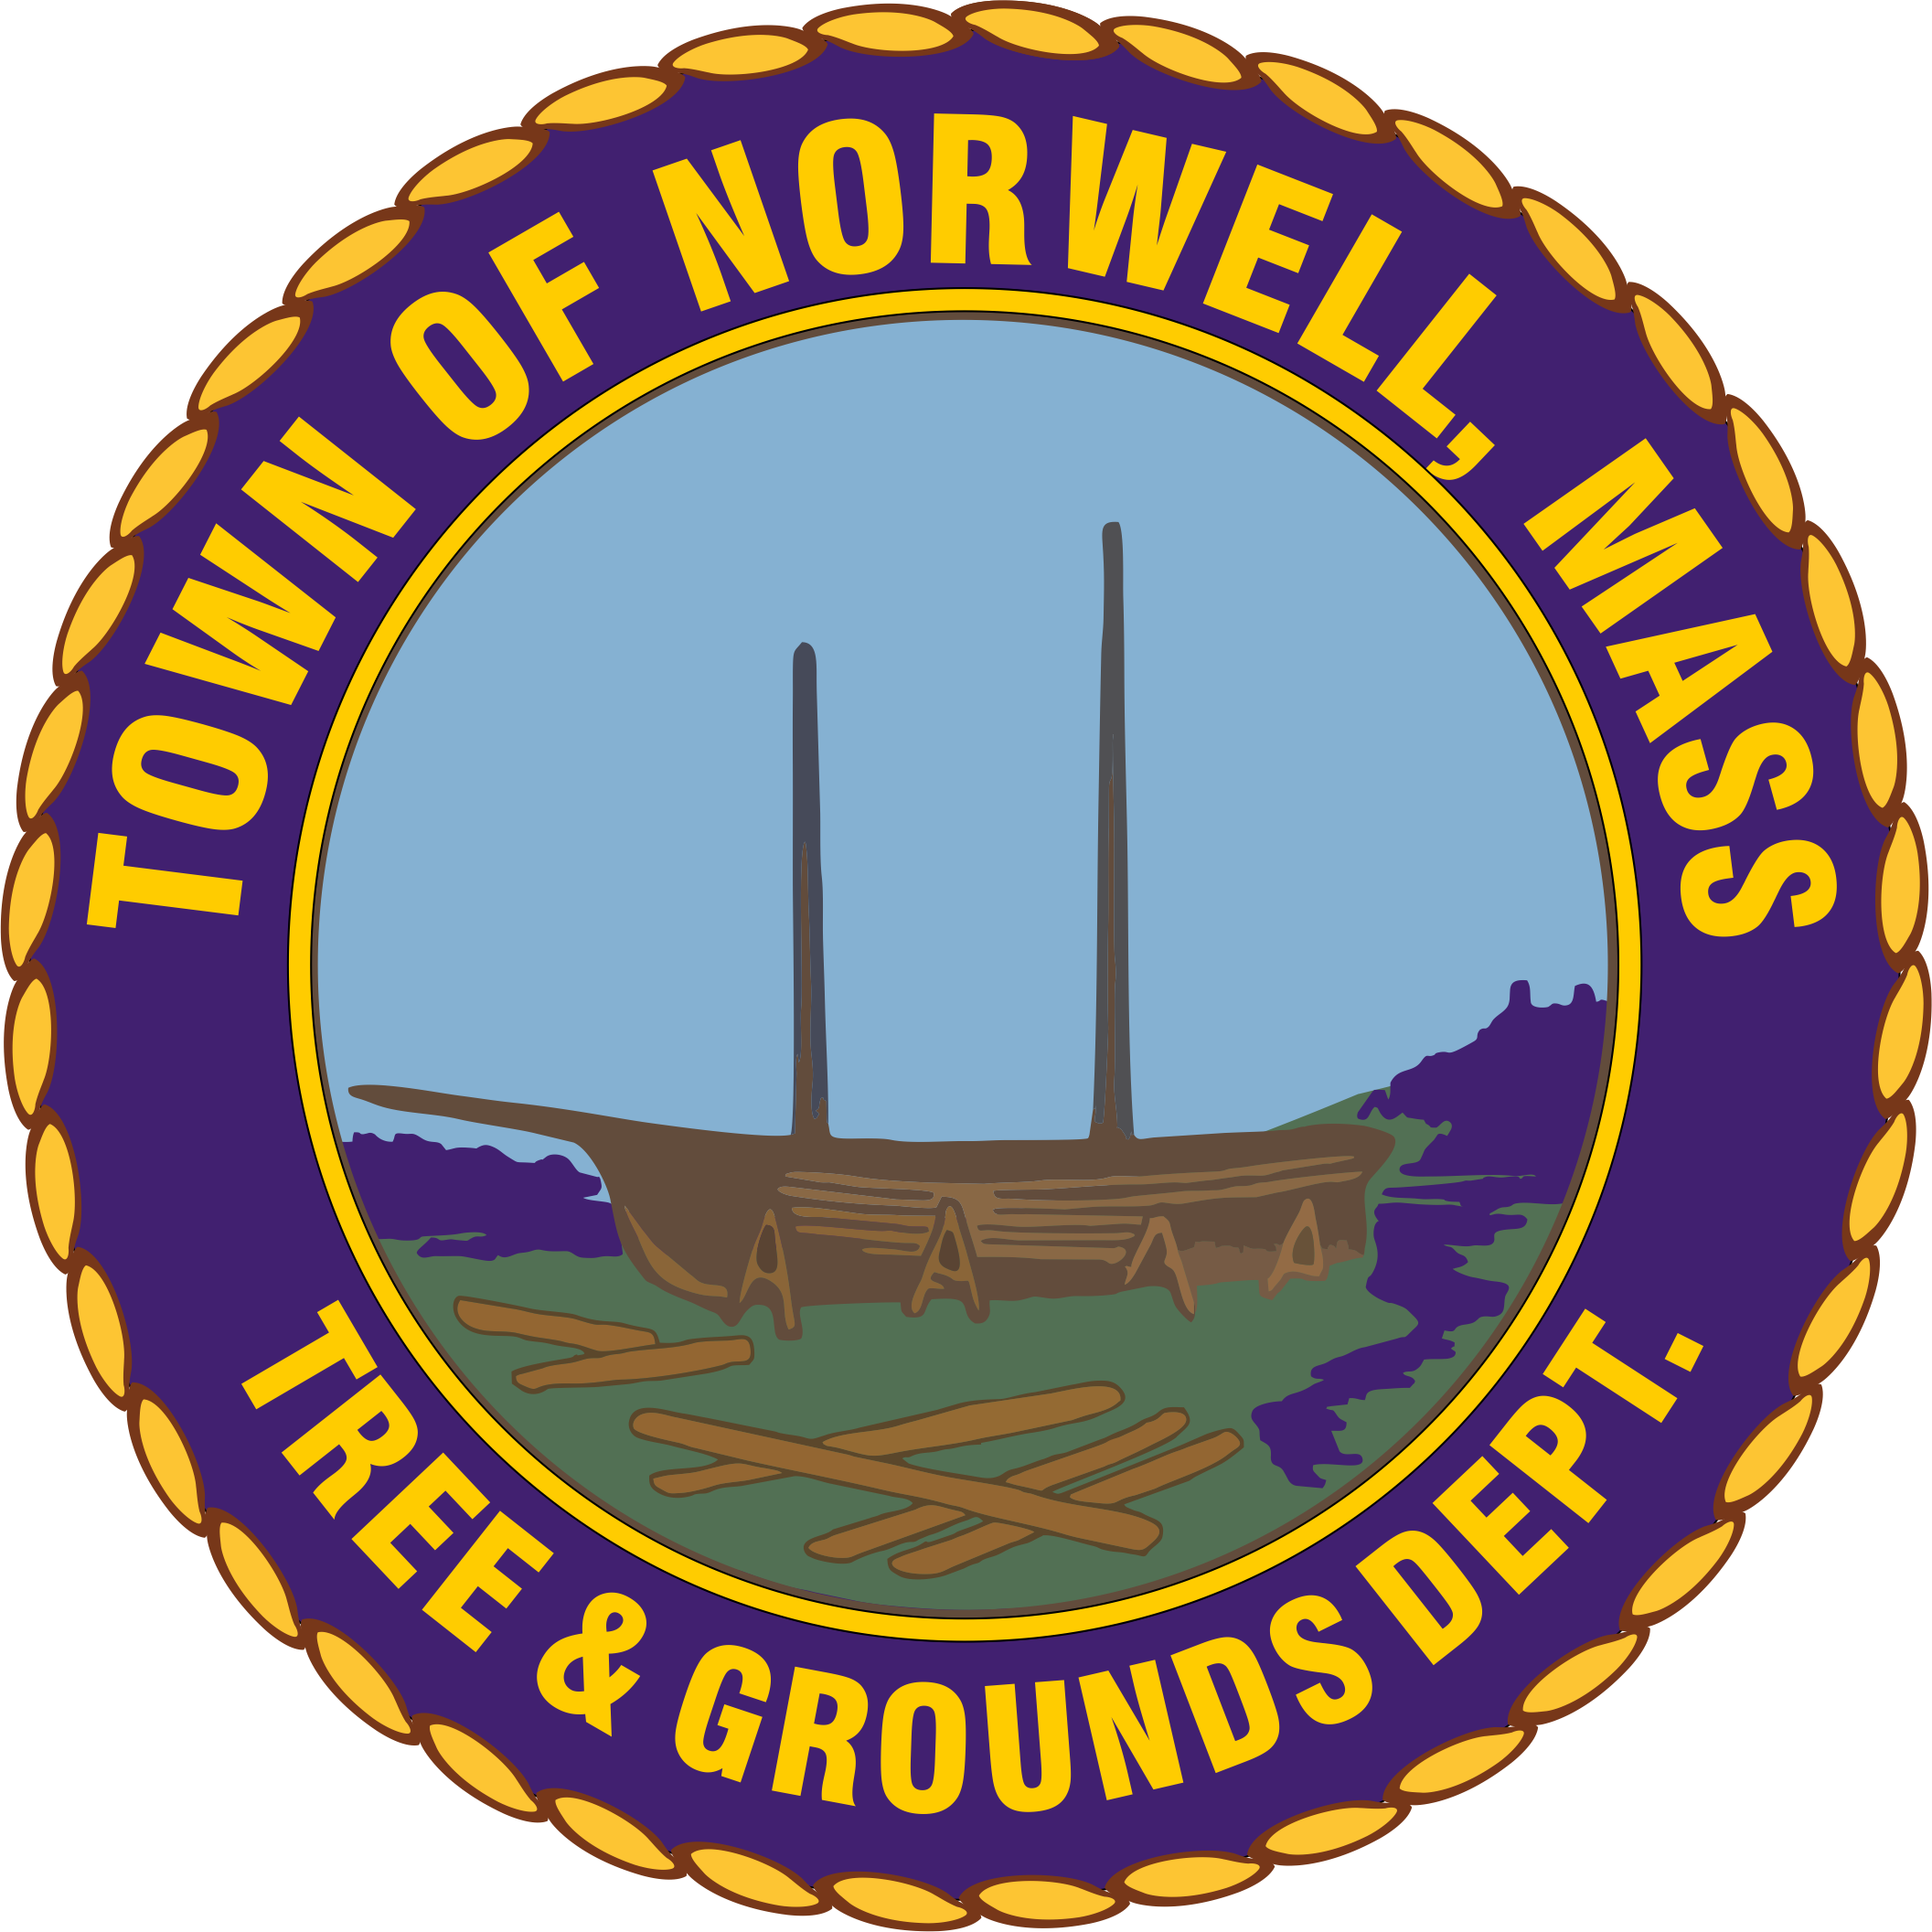 Town of Norwell Mass Tree and Grounds Division